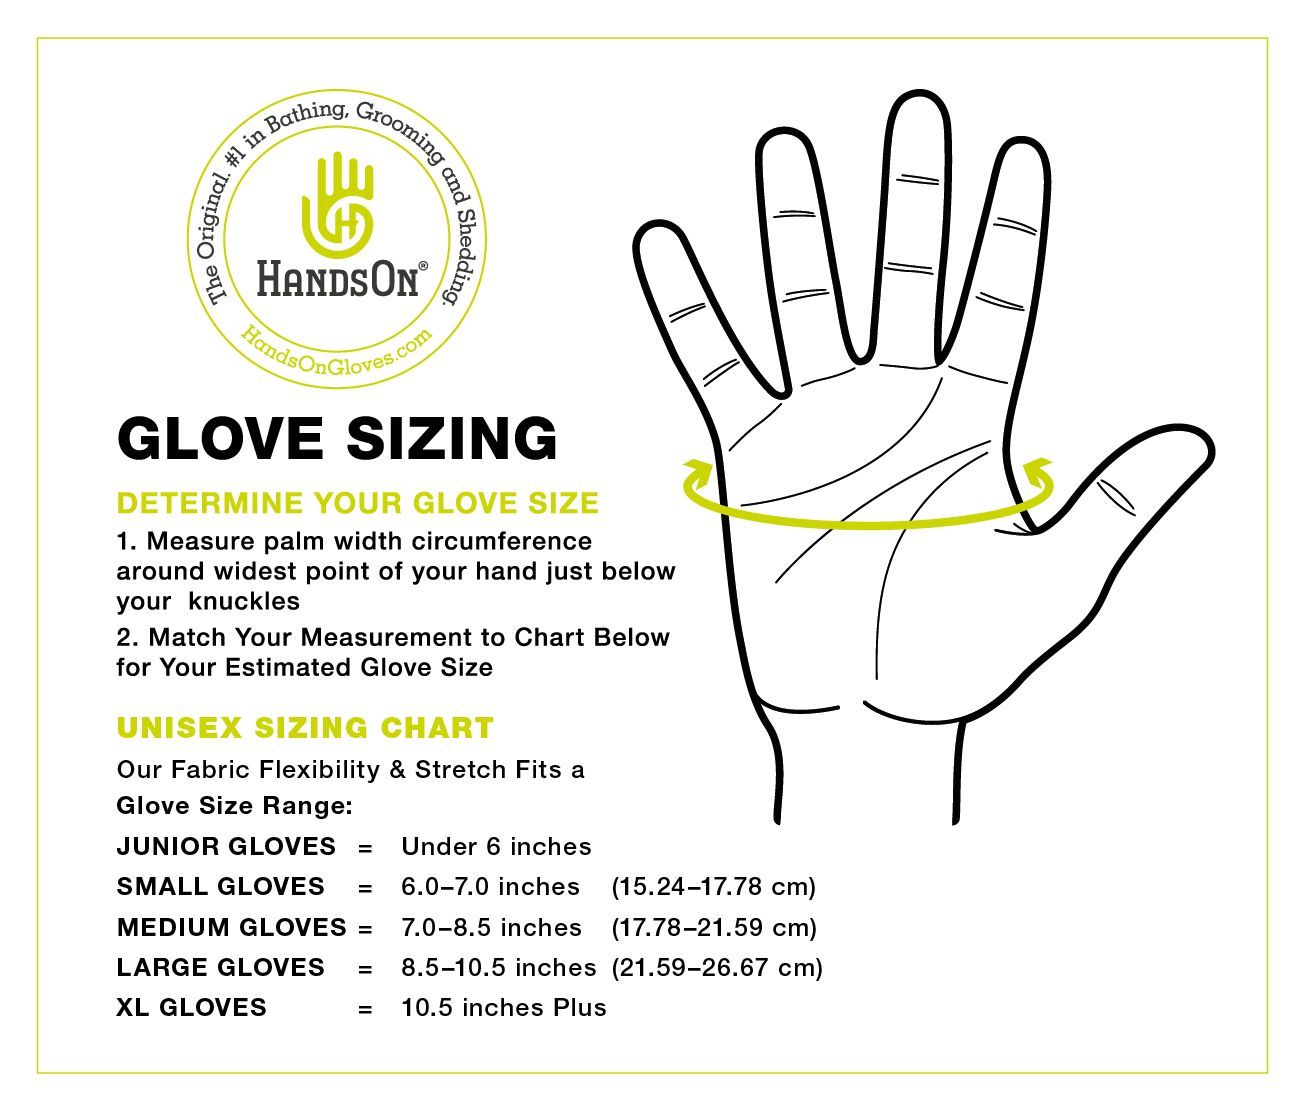 Hands on grooming gloves